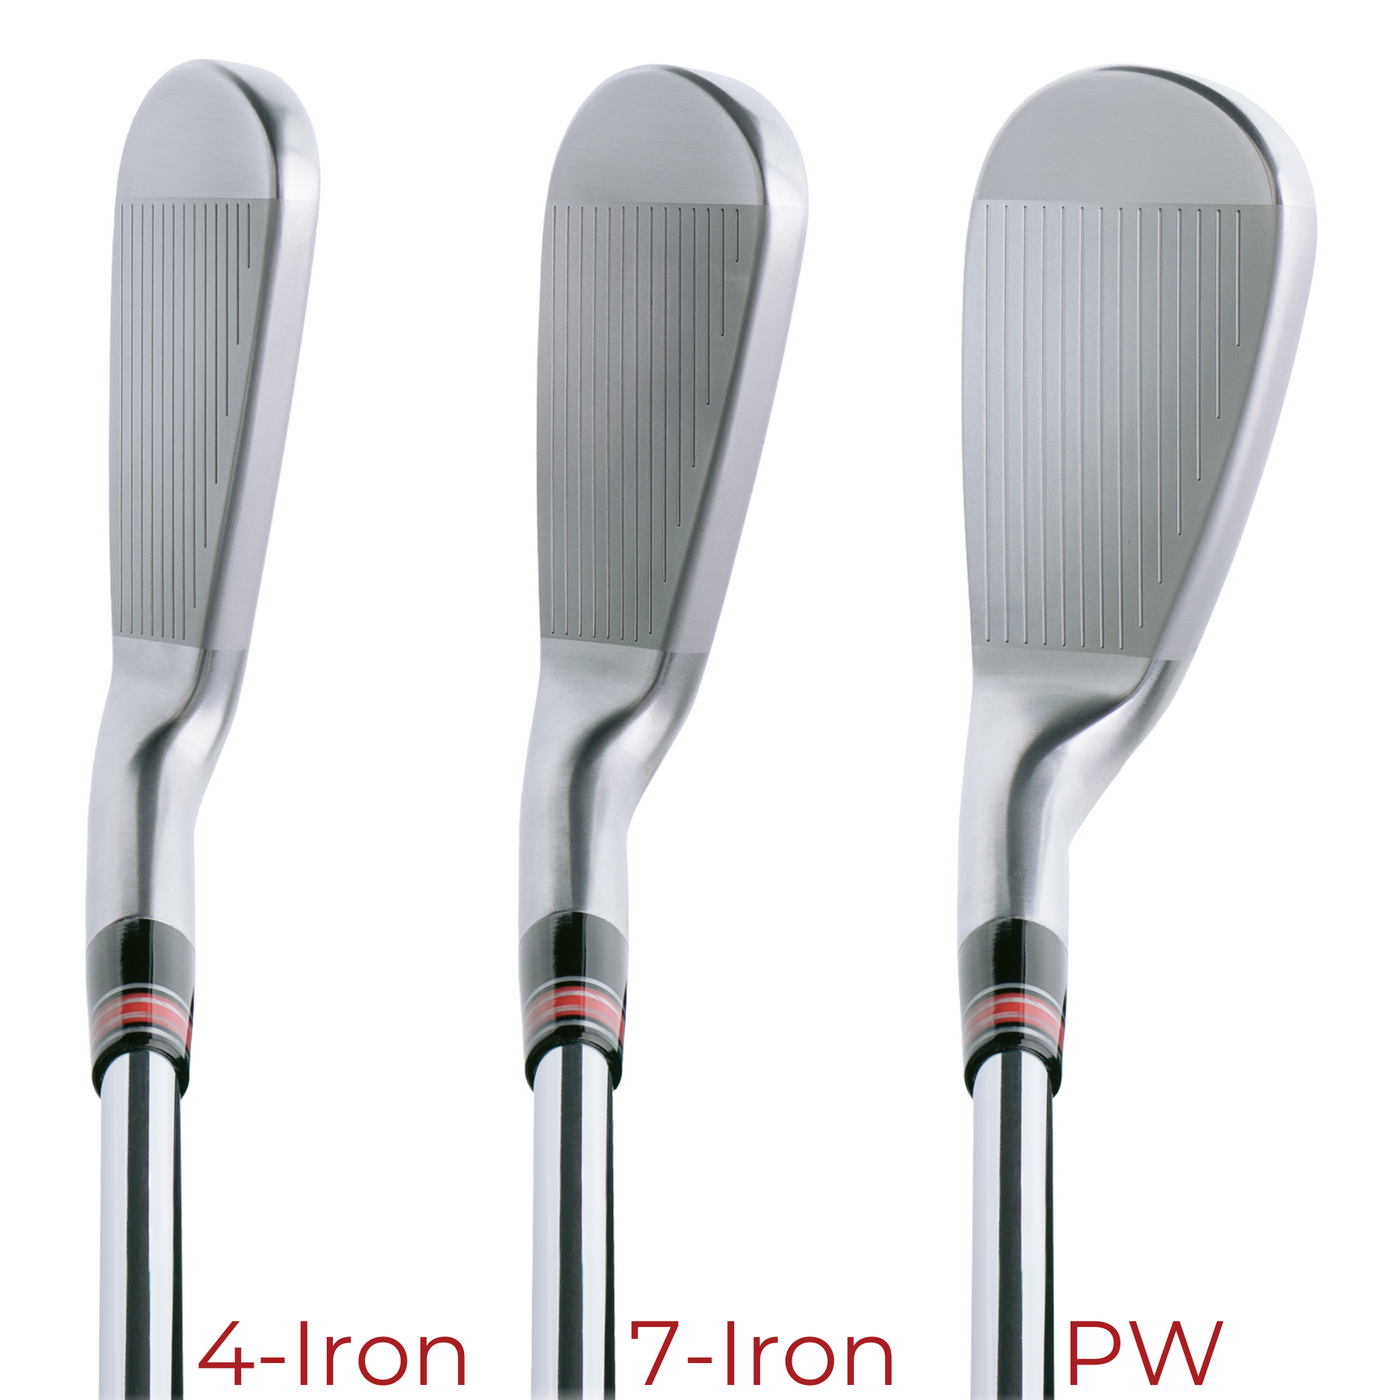 Edel SMS Irons 4-iron, 7-iron, and pitching wedge player view